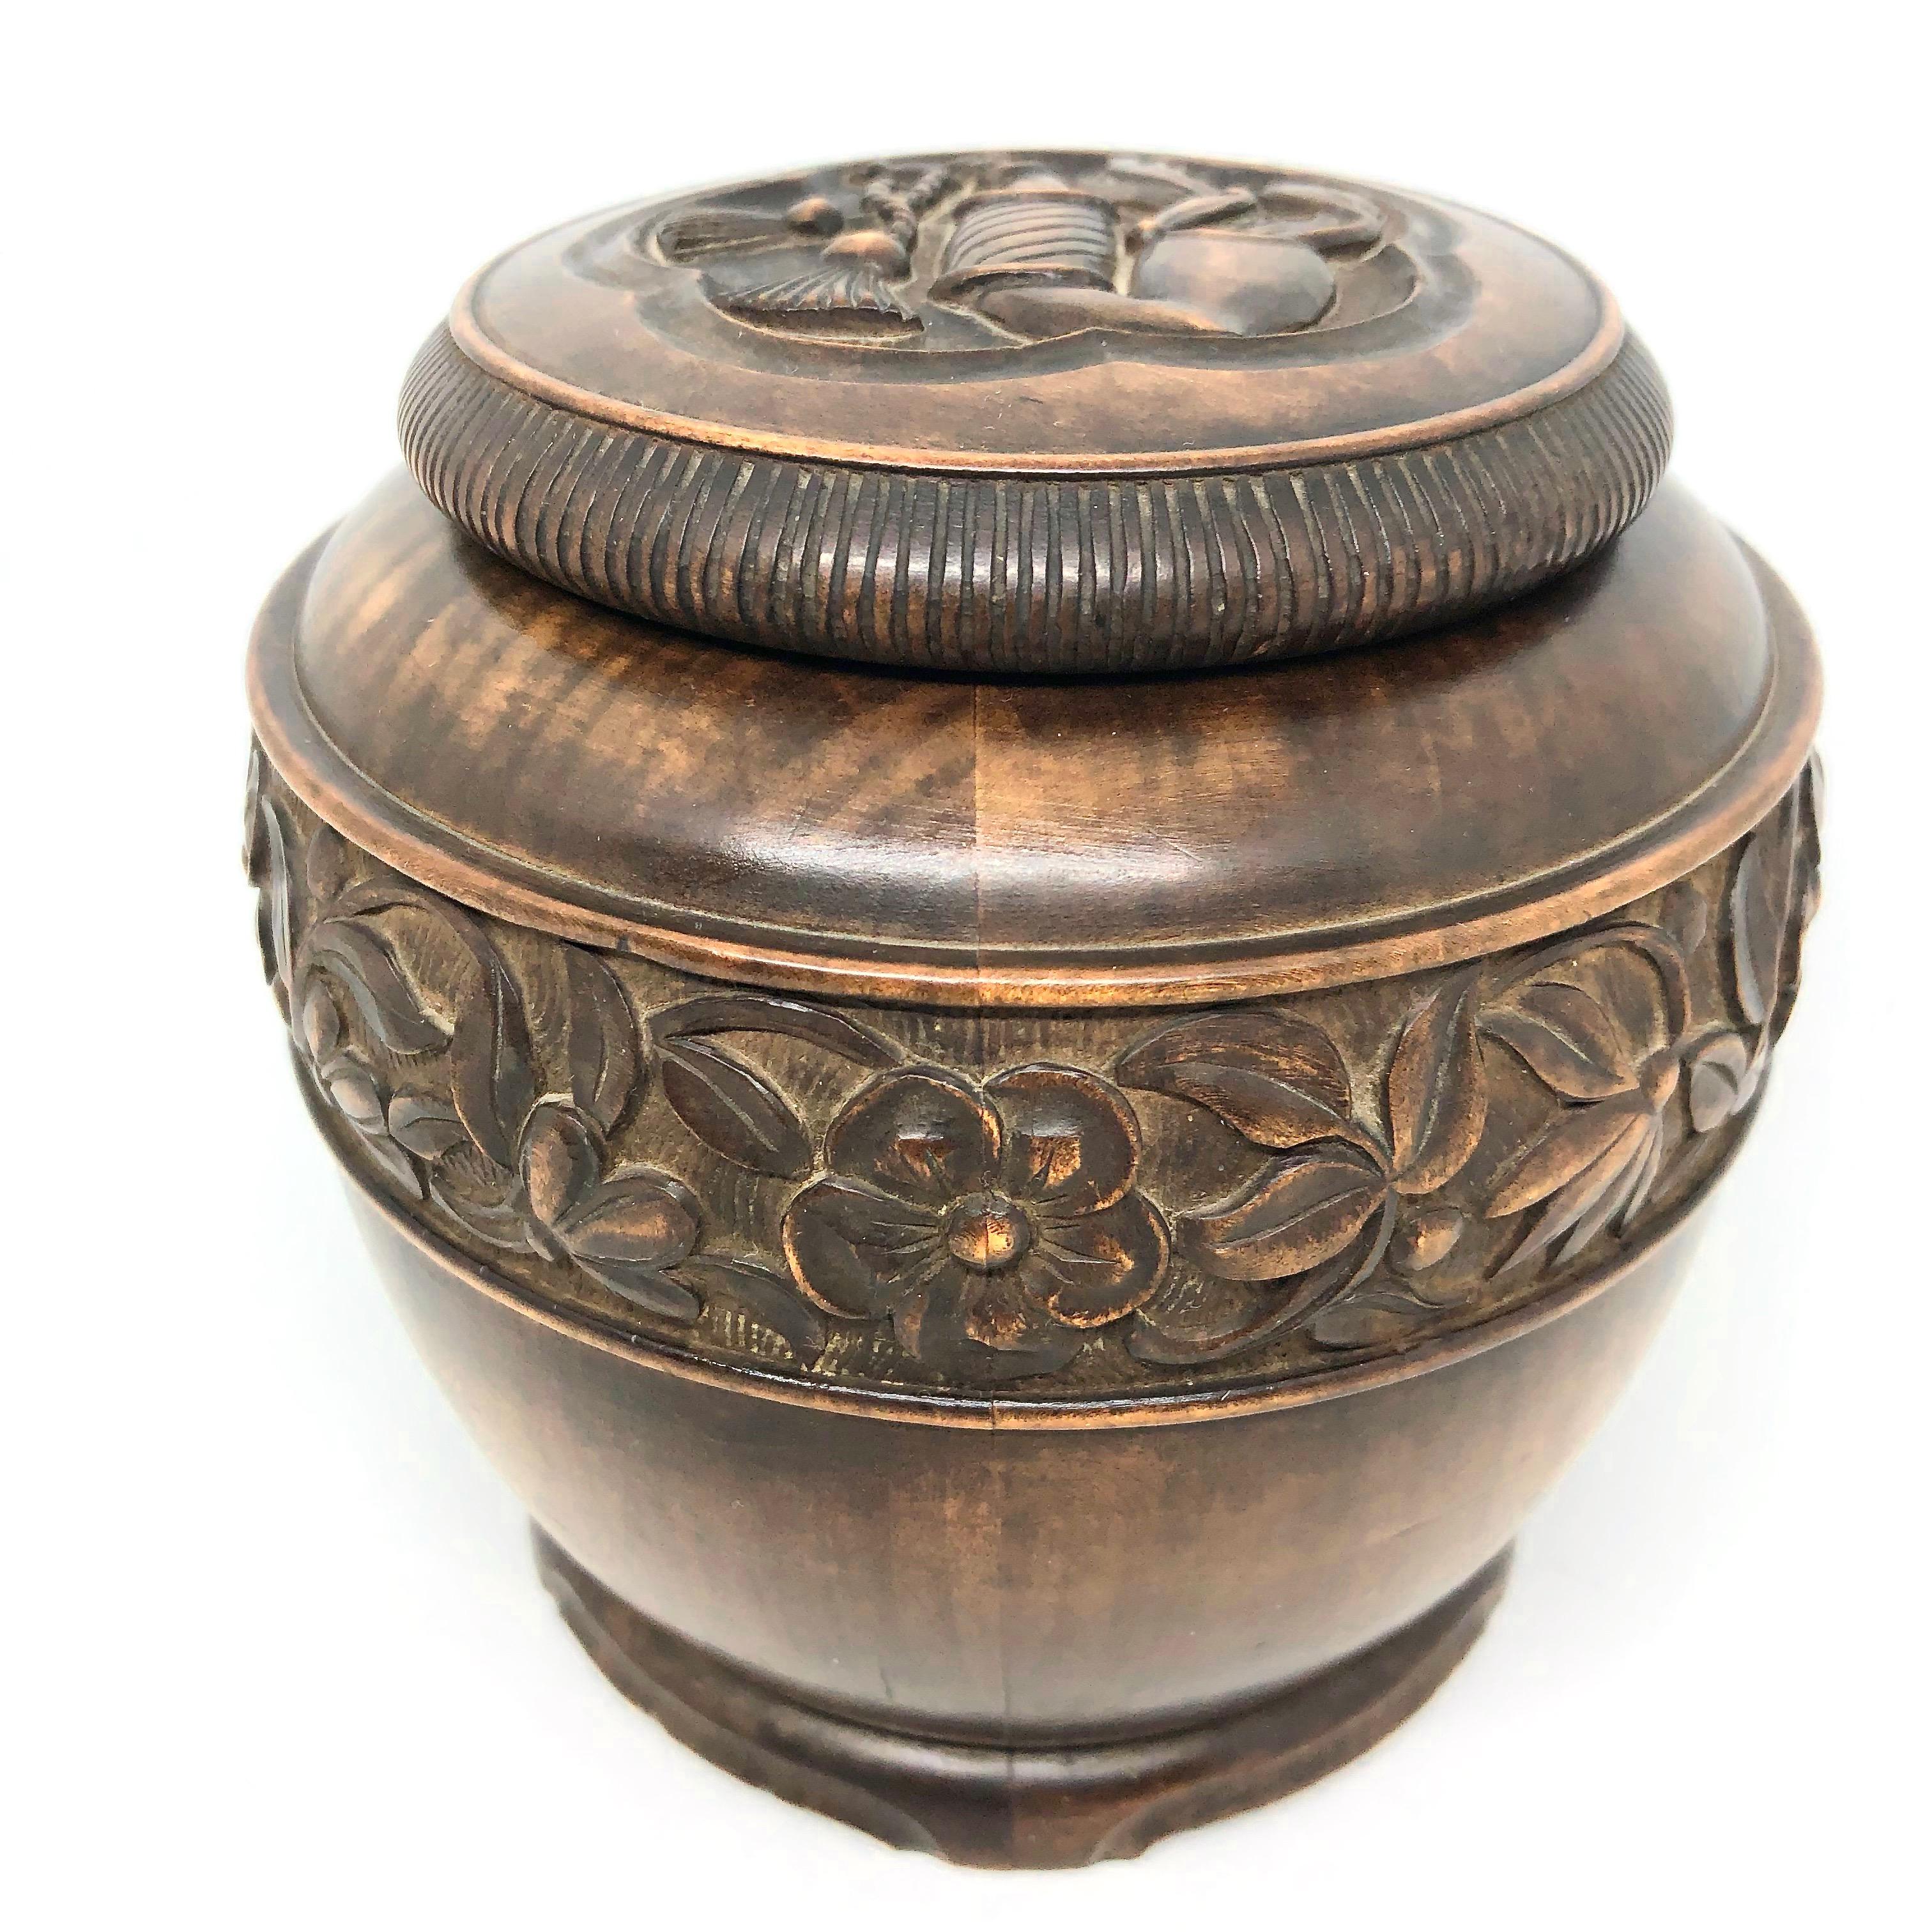 Classic early 1900s Black Forest Brienz wood carved Tobacco Jar. Nice addition to your room or just for use it on your desk. Found at an estate sale in Nuremberg, Germany.